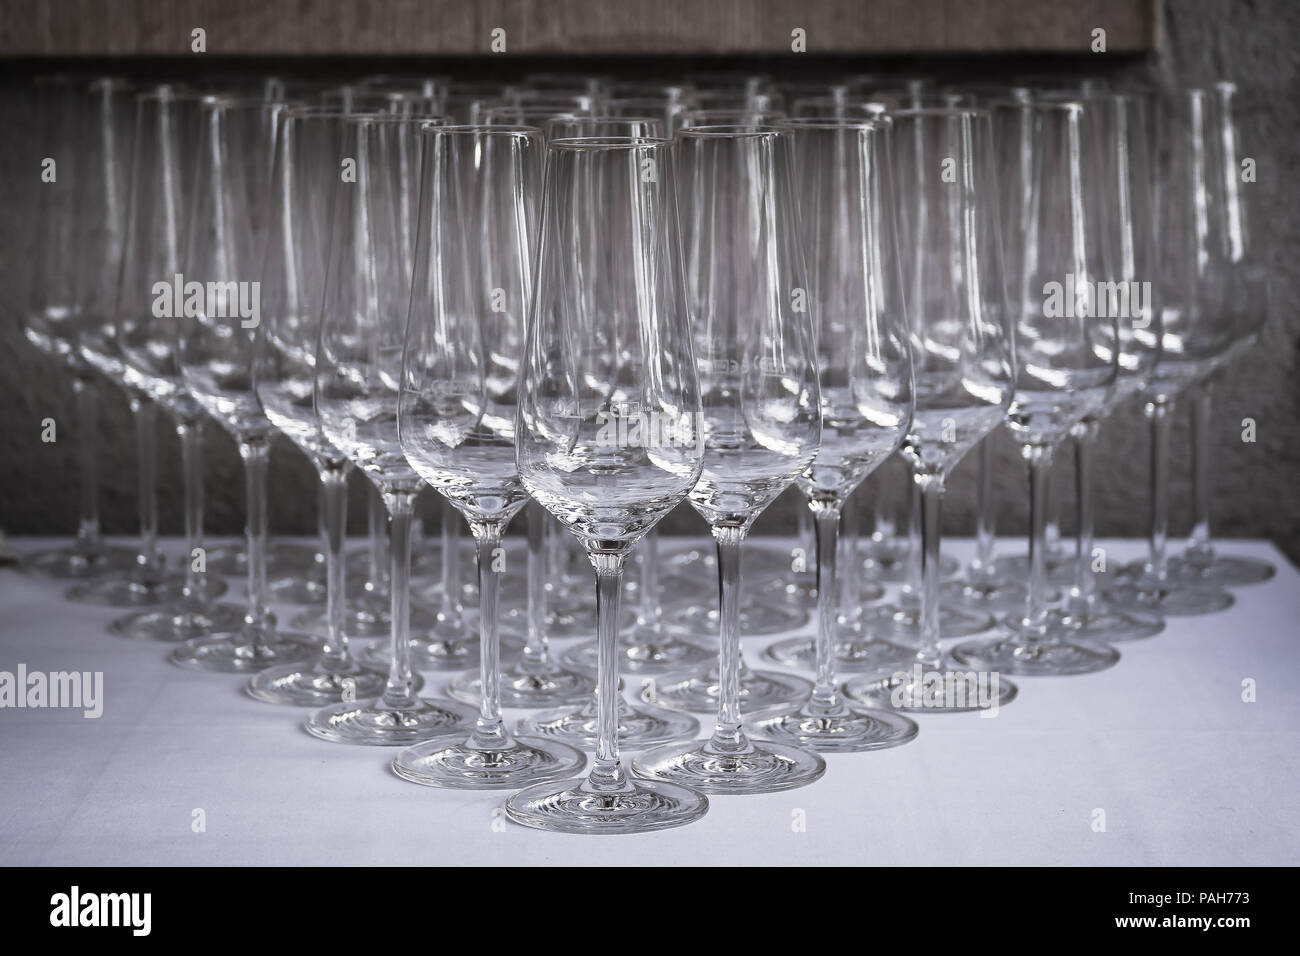 Champagne glasses ordered in triangular shape Stock Photo